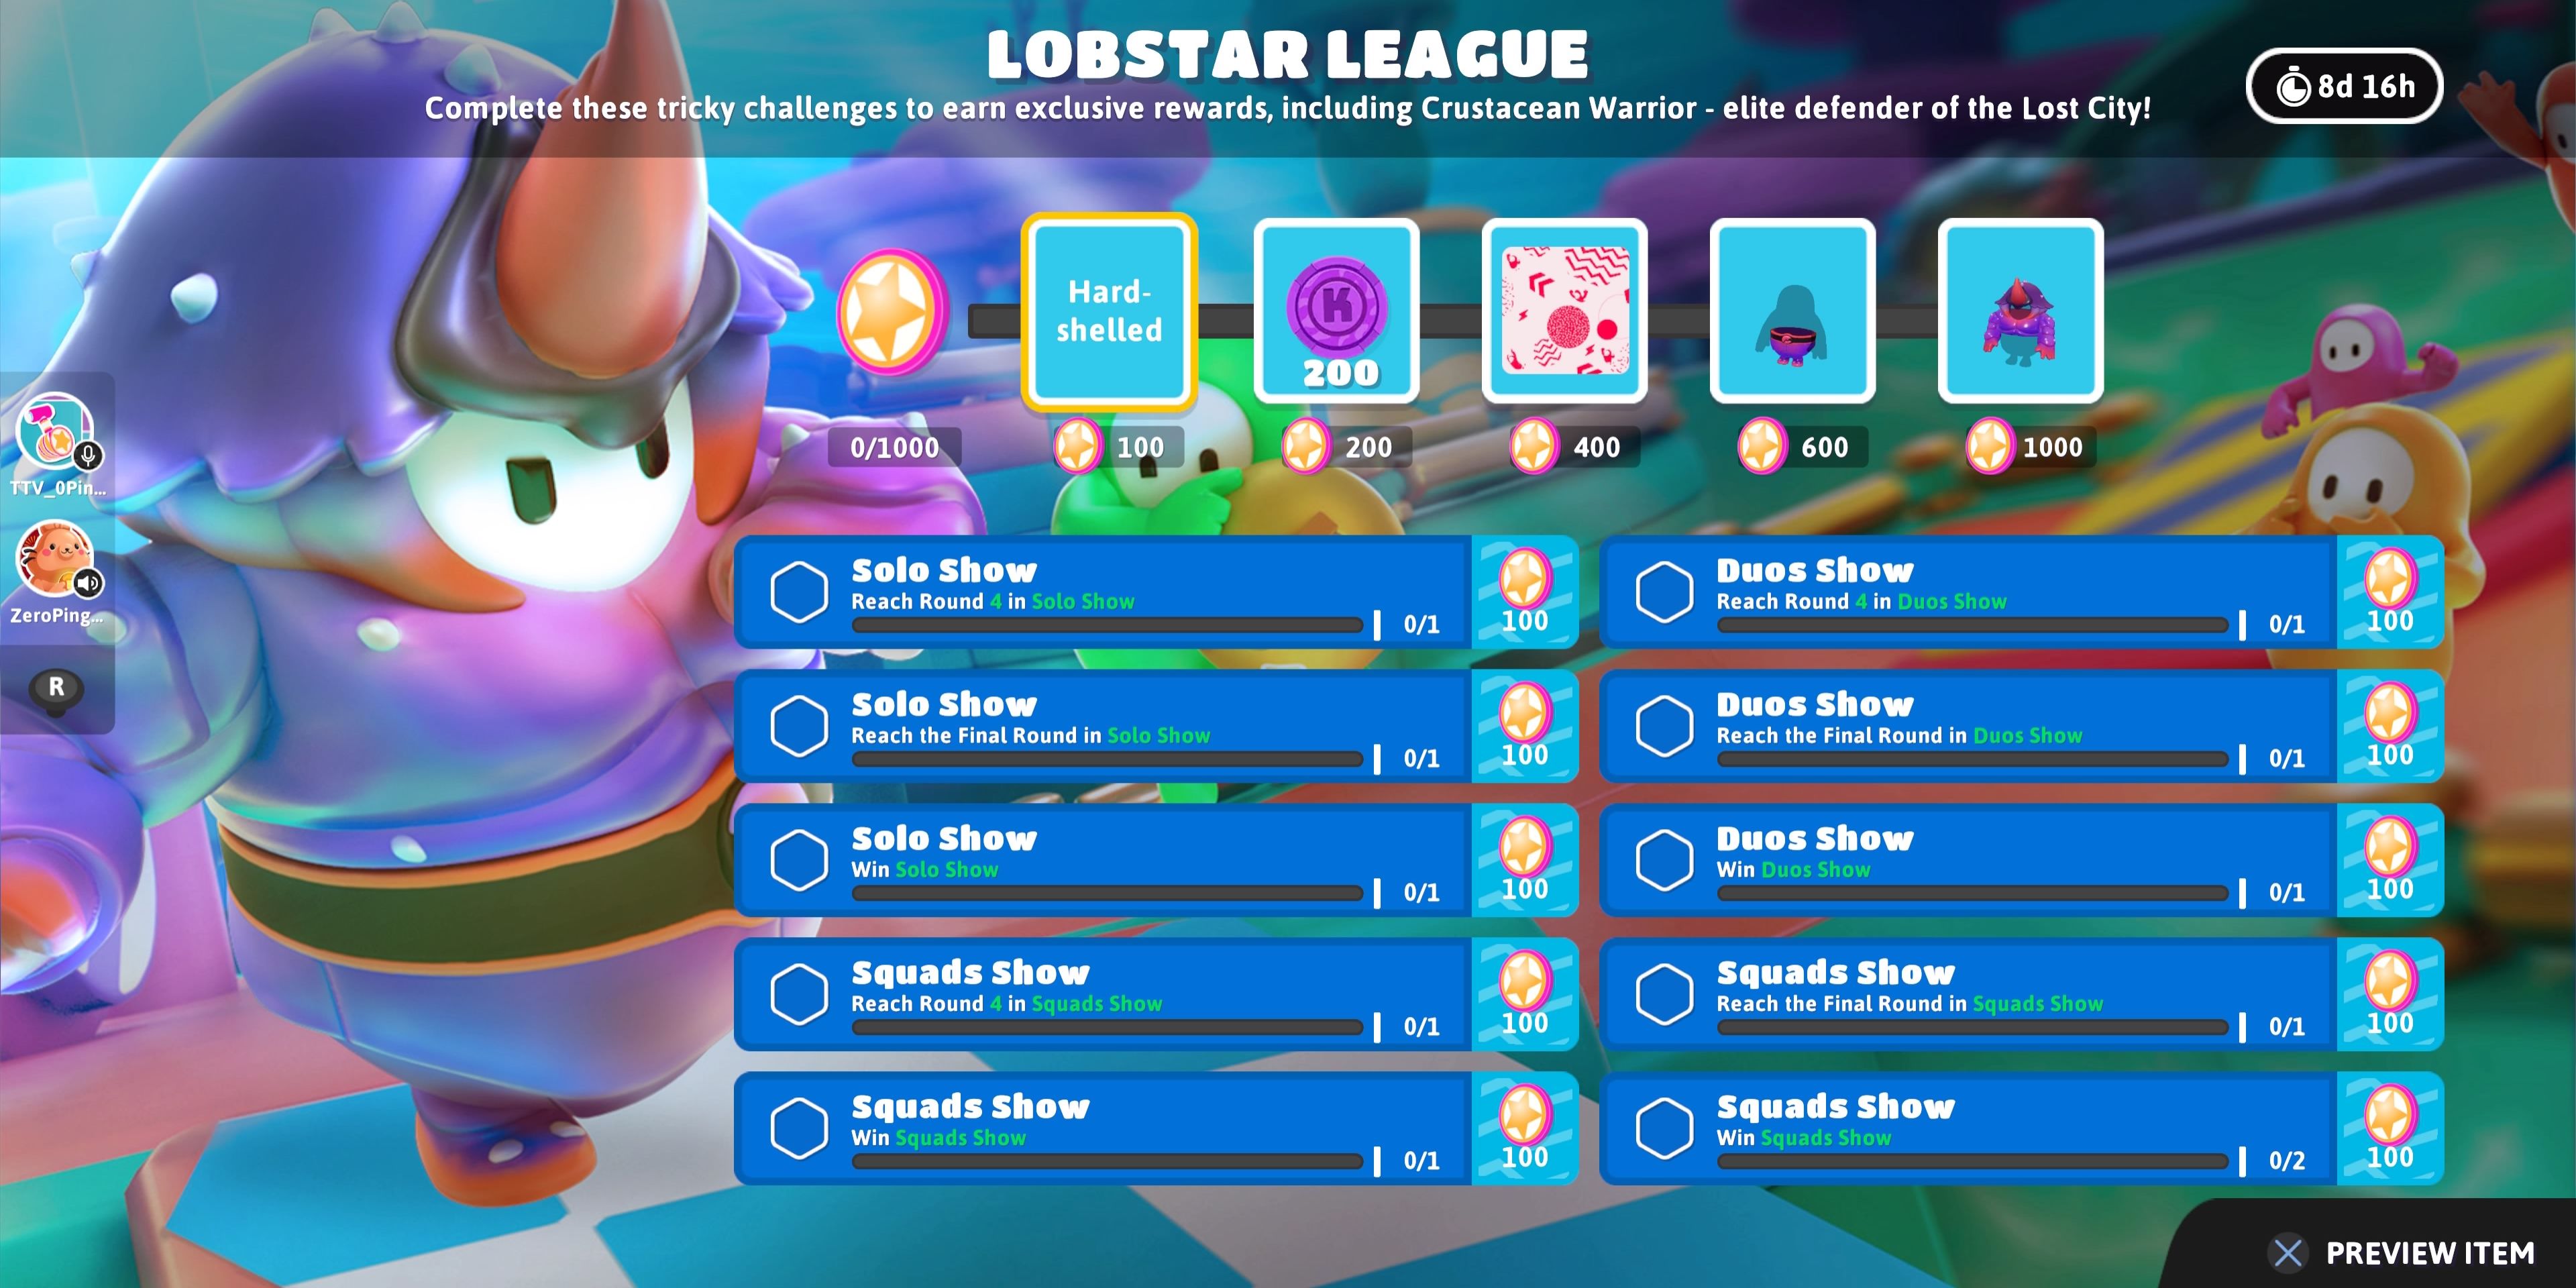 Fall Guys Lobstar League Event page, showing all challenges and rewards